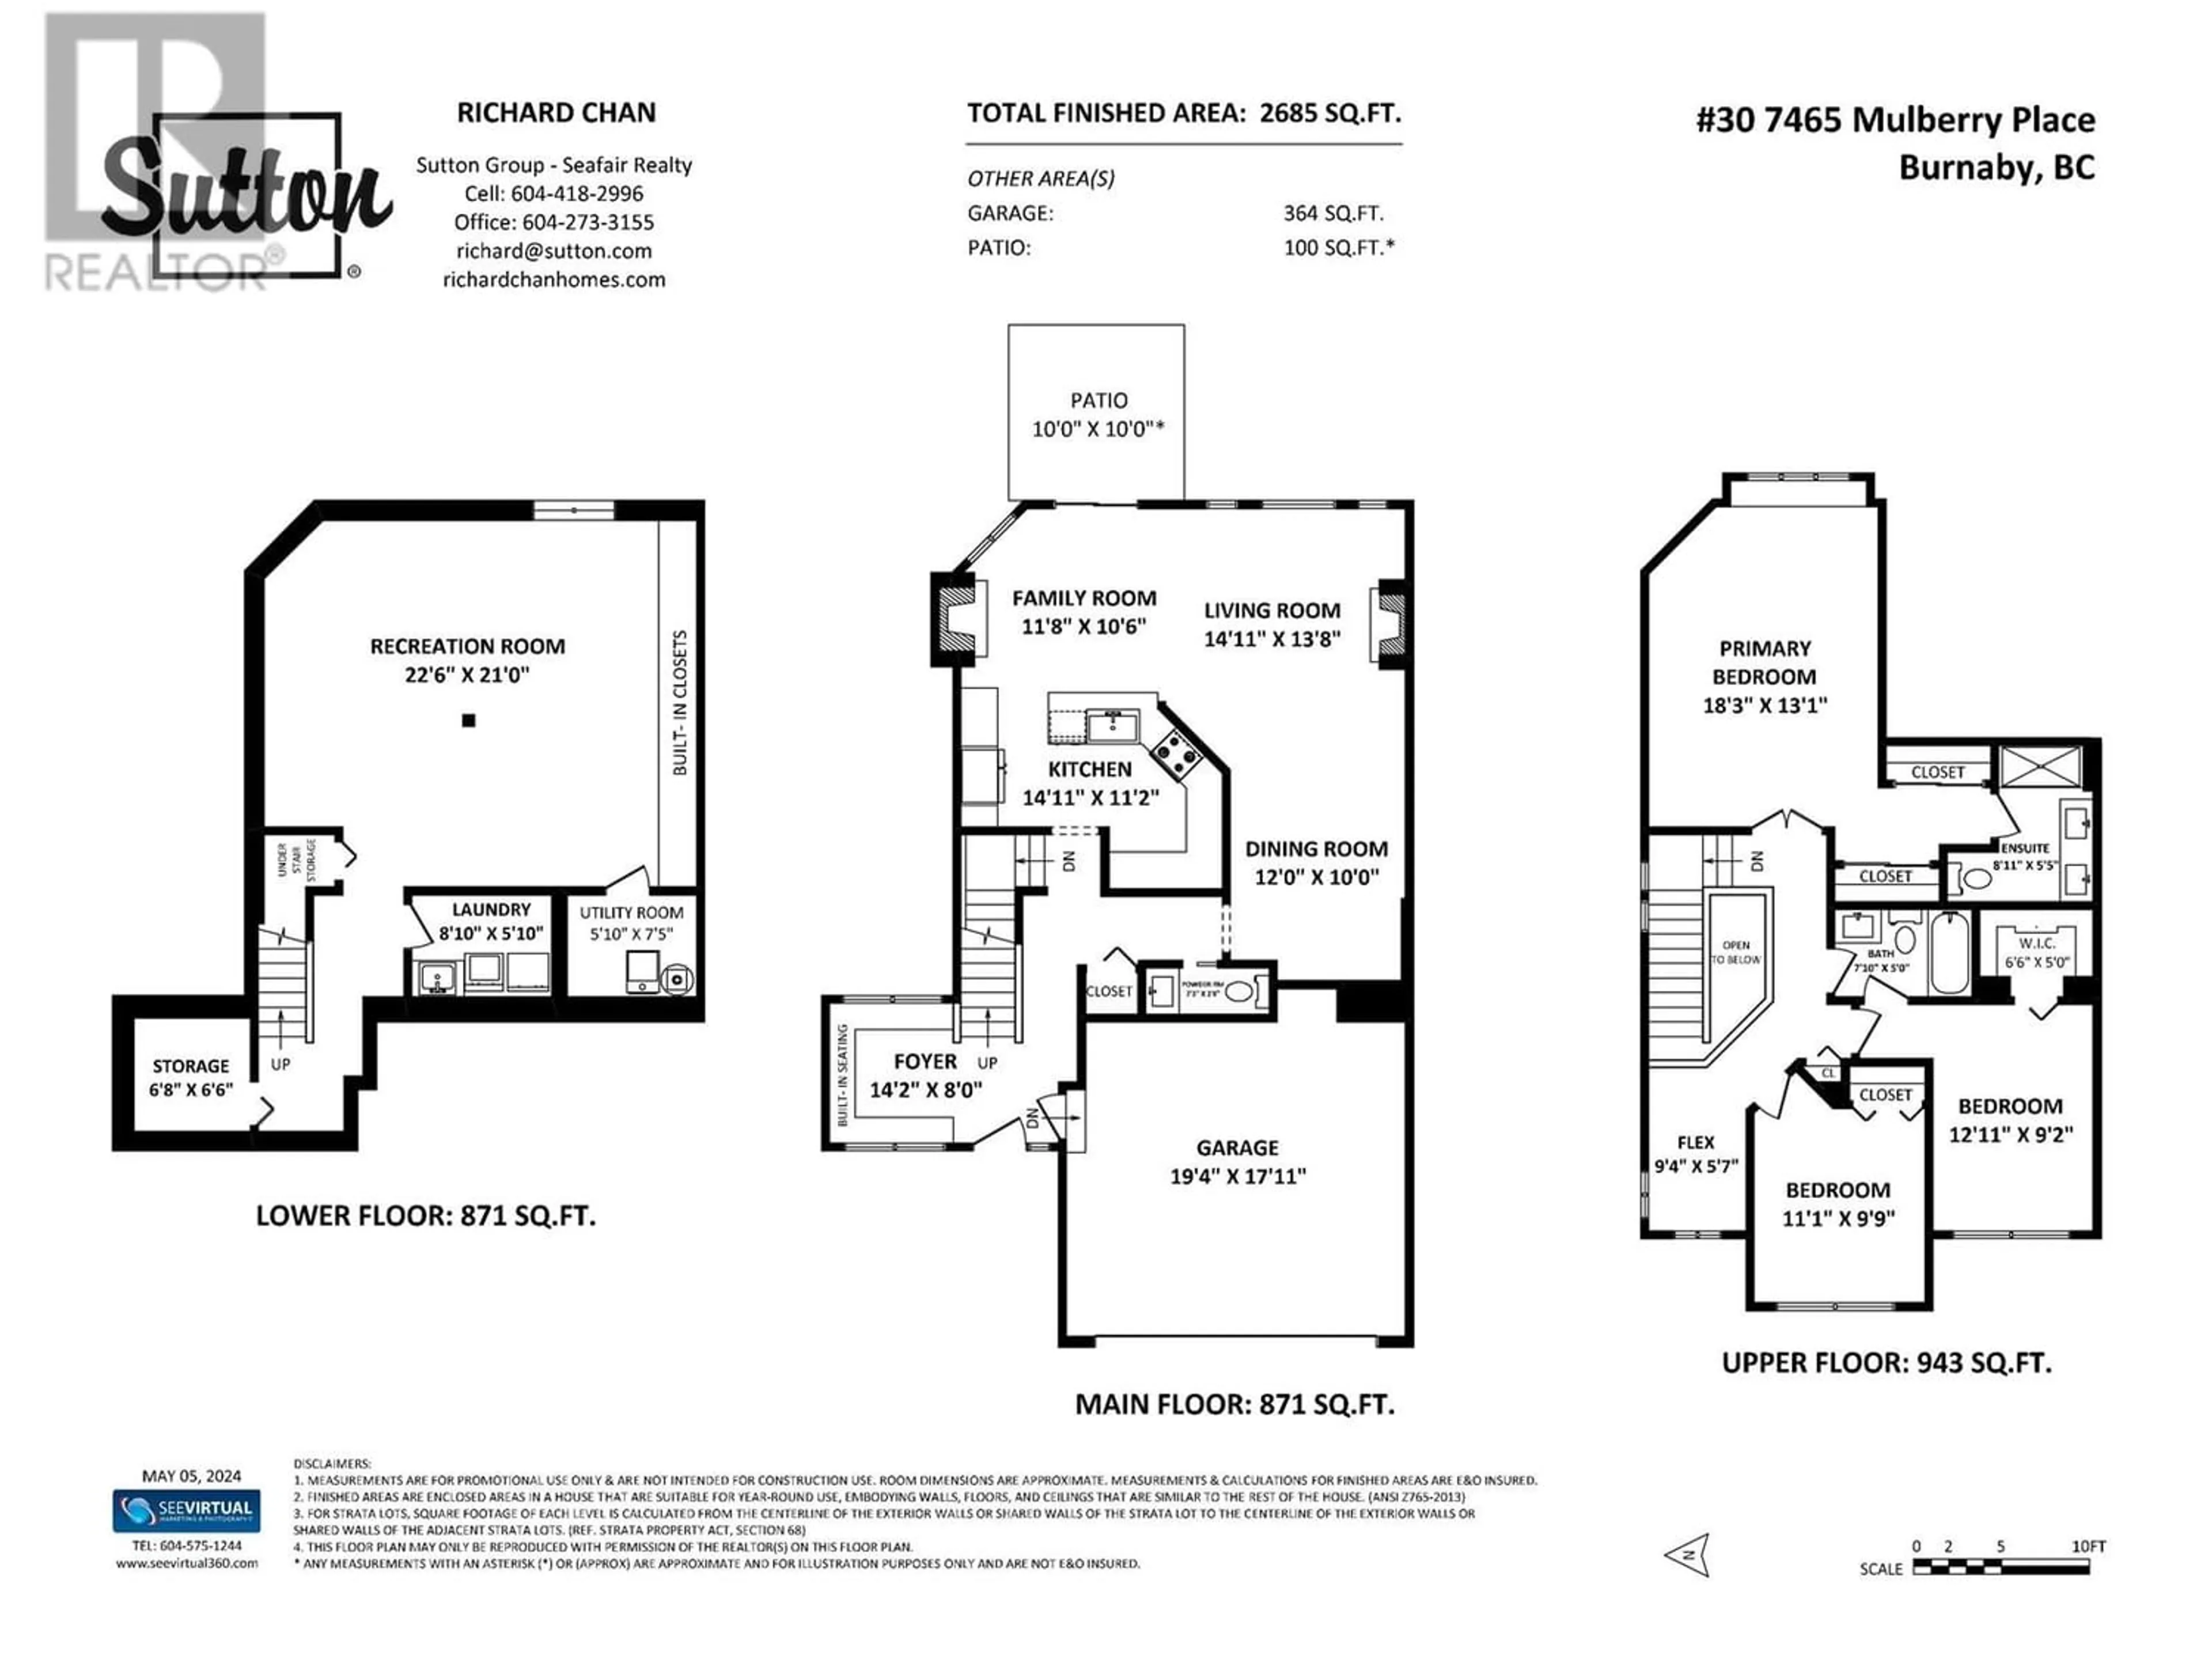 Floor plan for 30 7465 MULBERRY PLACE, Burnaby British Columbia V3N5A1